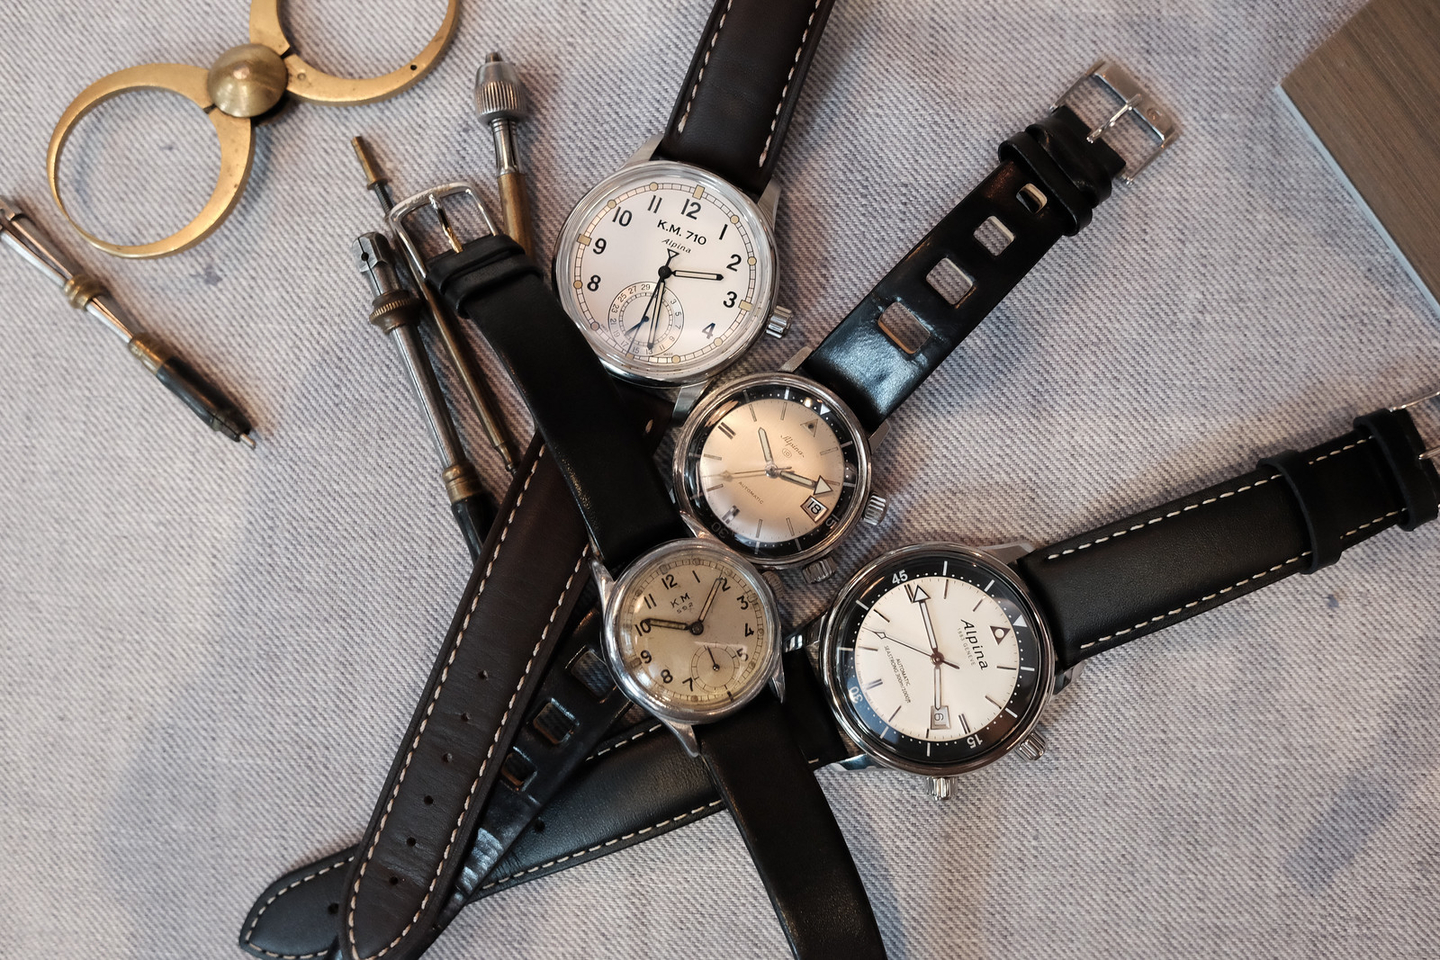 Two new Alpina Heritage timepieces, and the vintage watches which inspired them